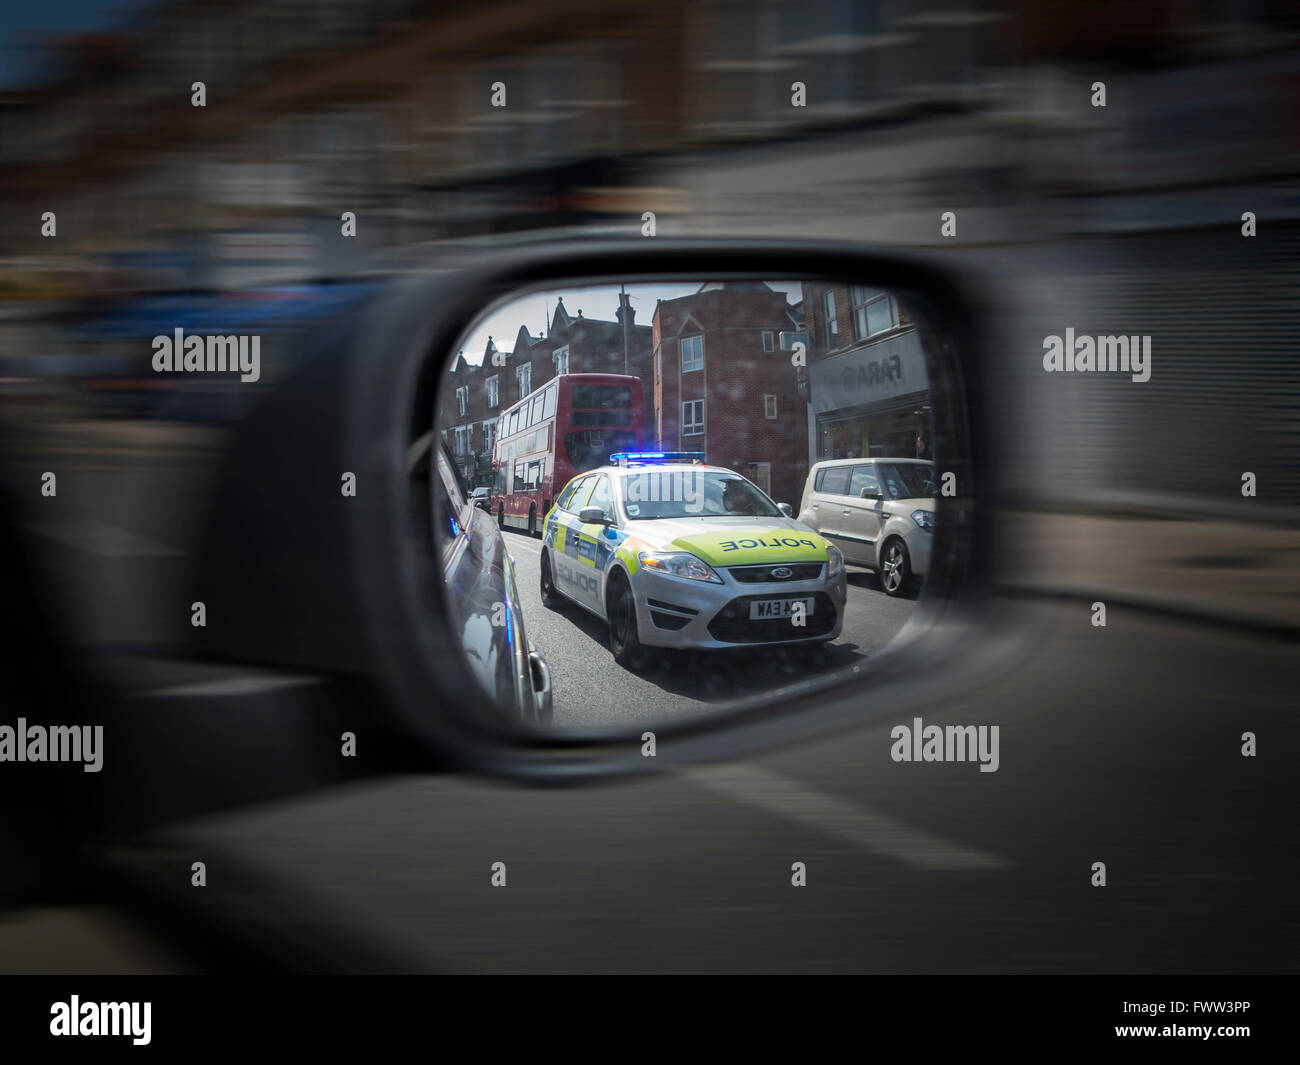 A police car chasing in a car's wing mirror Stock Photo